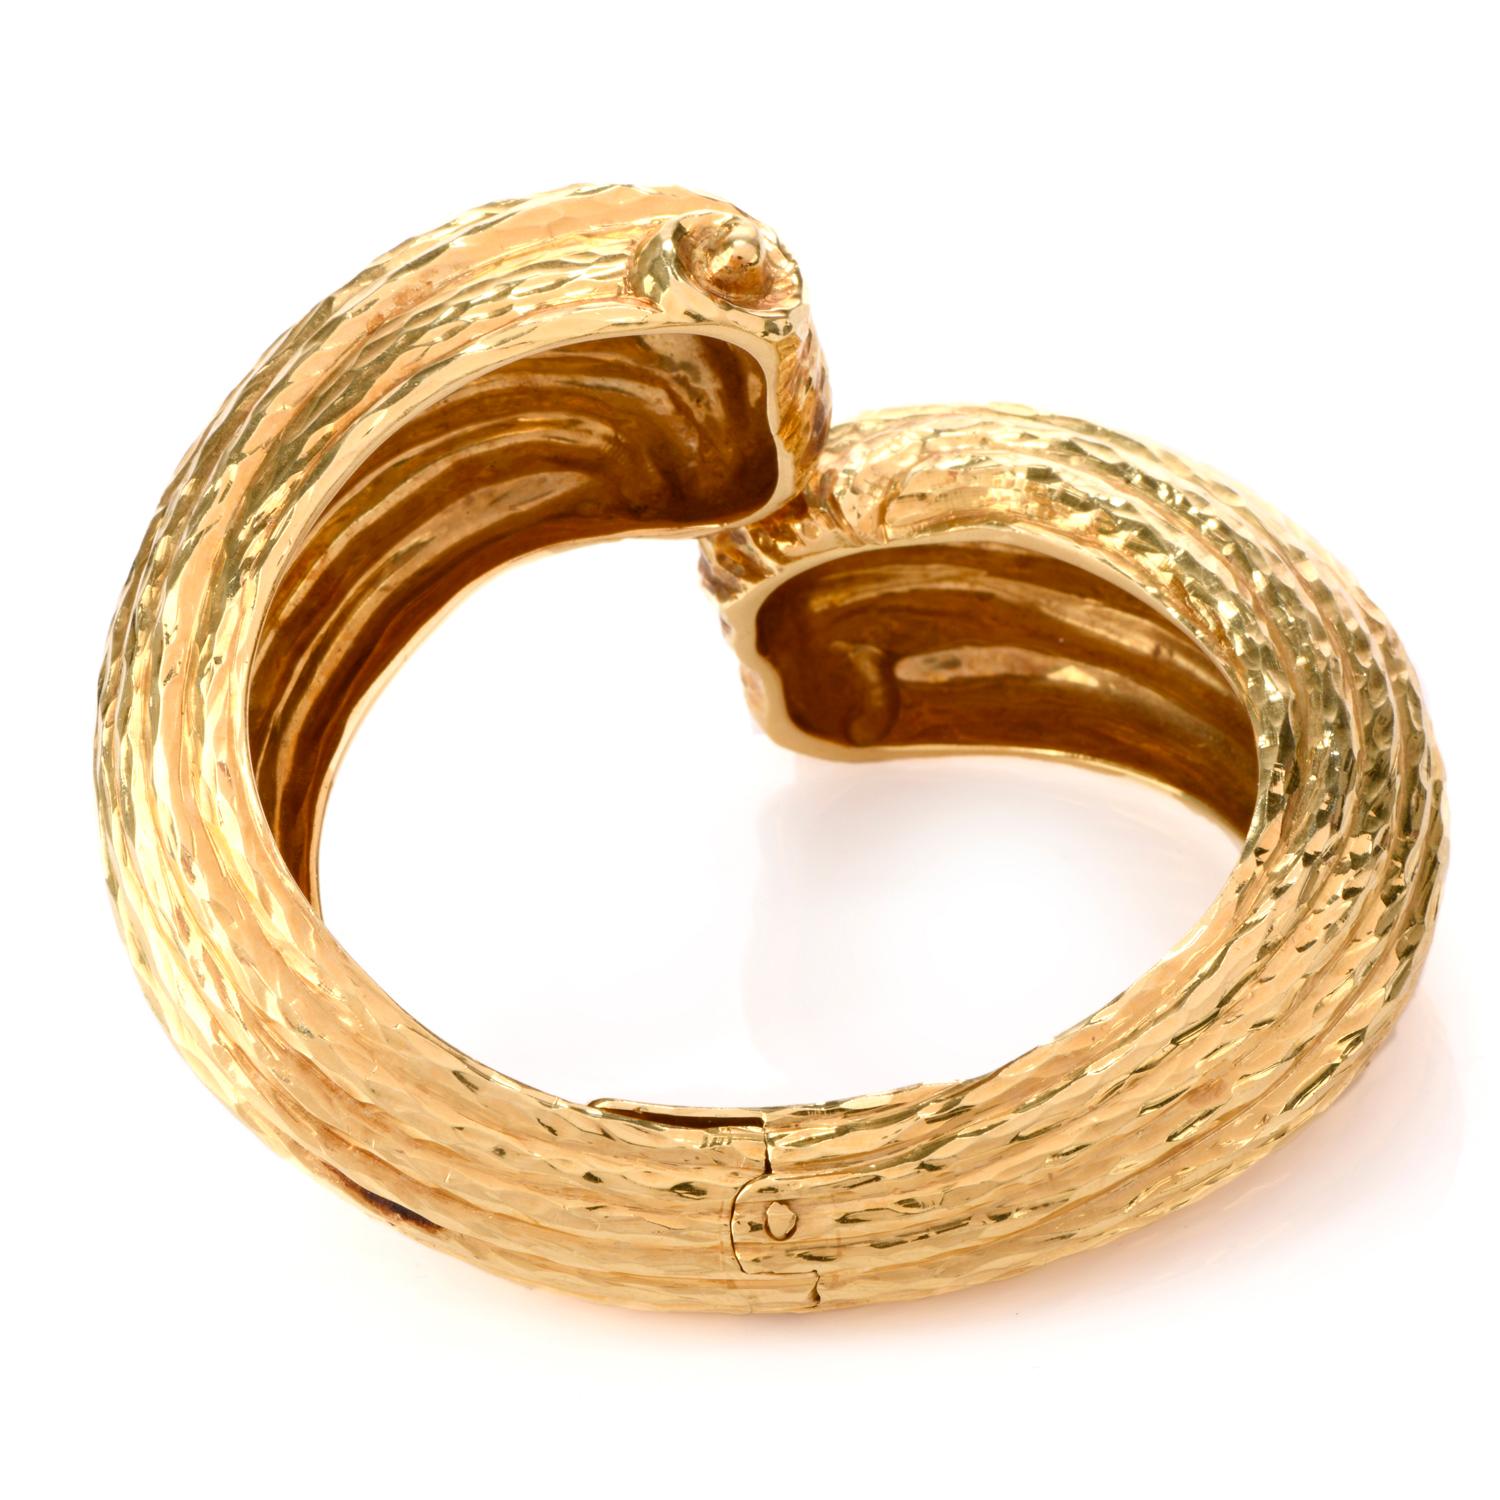 This incredible late 1970's 18K gold  cuff Bangle Bracelet was inspired in shell motif.

The ribbing of the shell design boasts a high polished hammered effect creating depth and interest.

The center of the vintage Bracelet is hinged for ease in